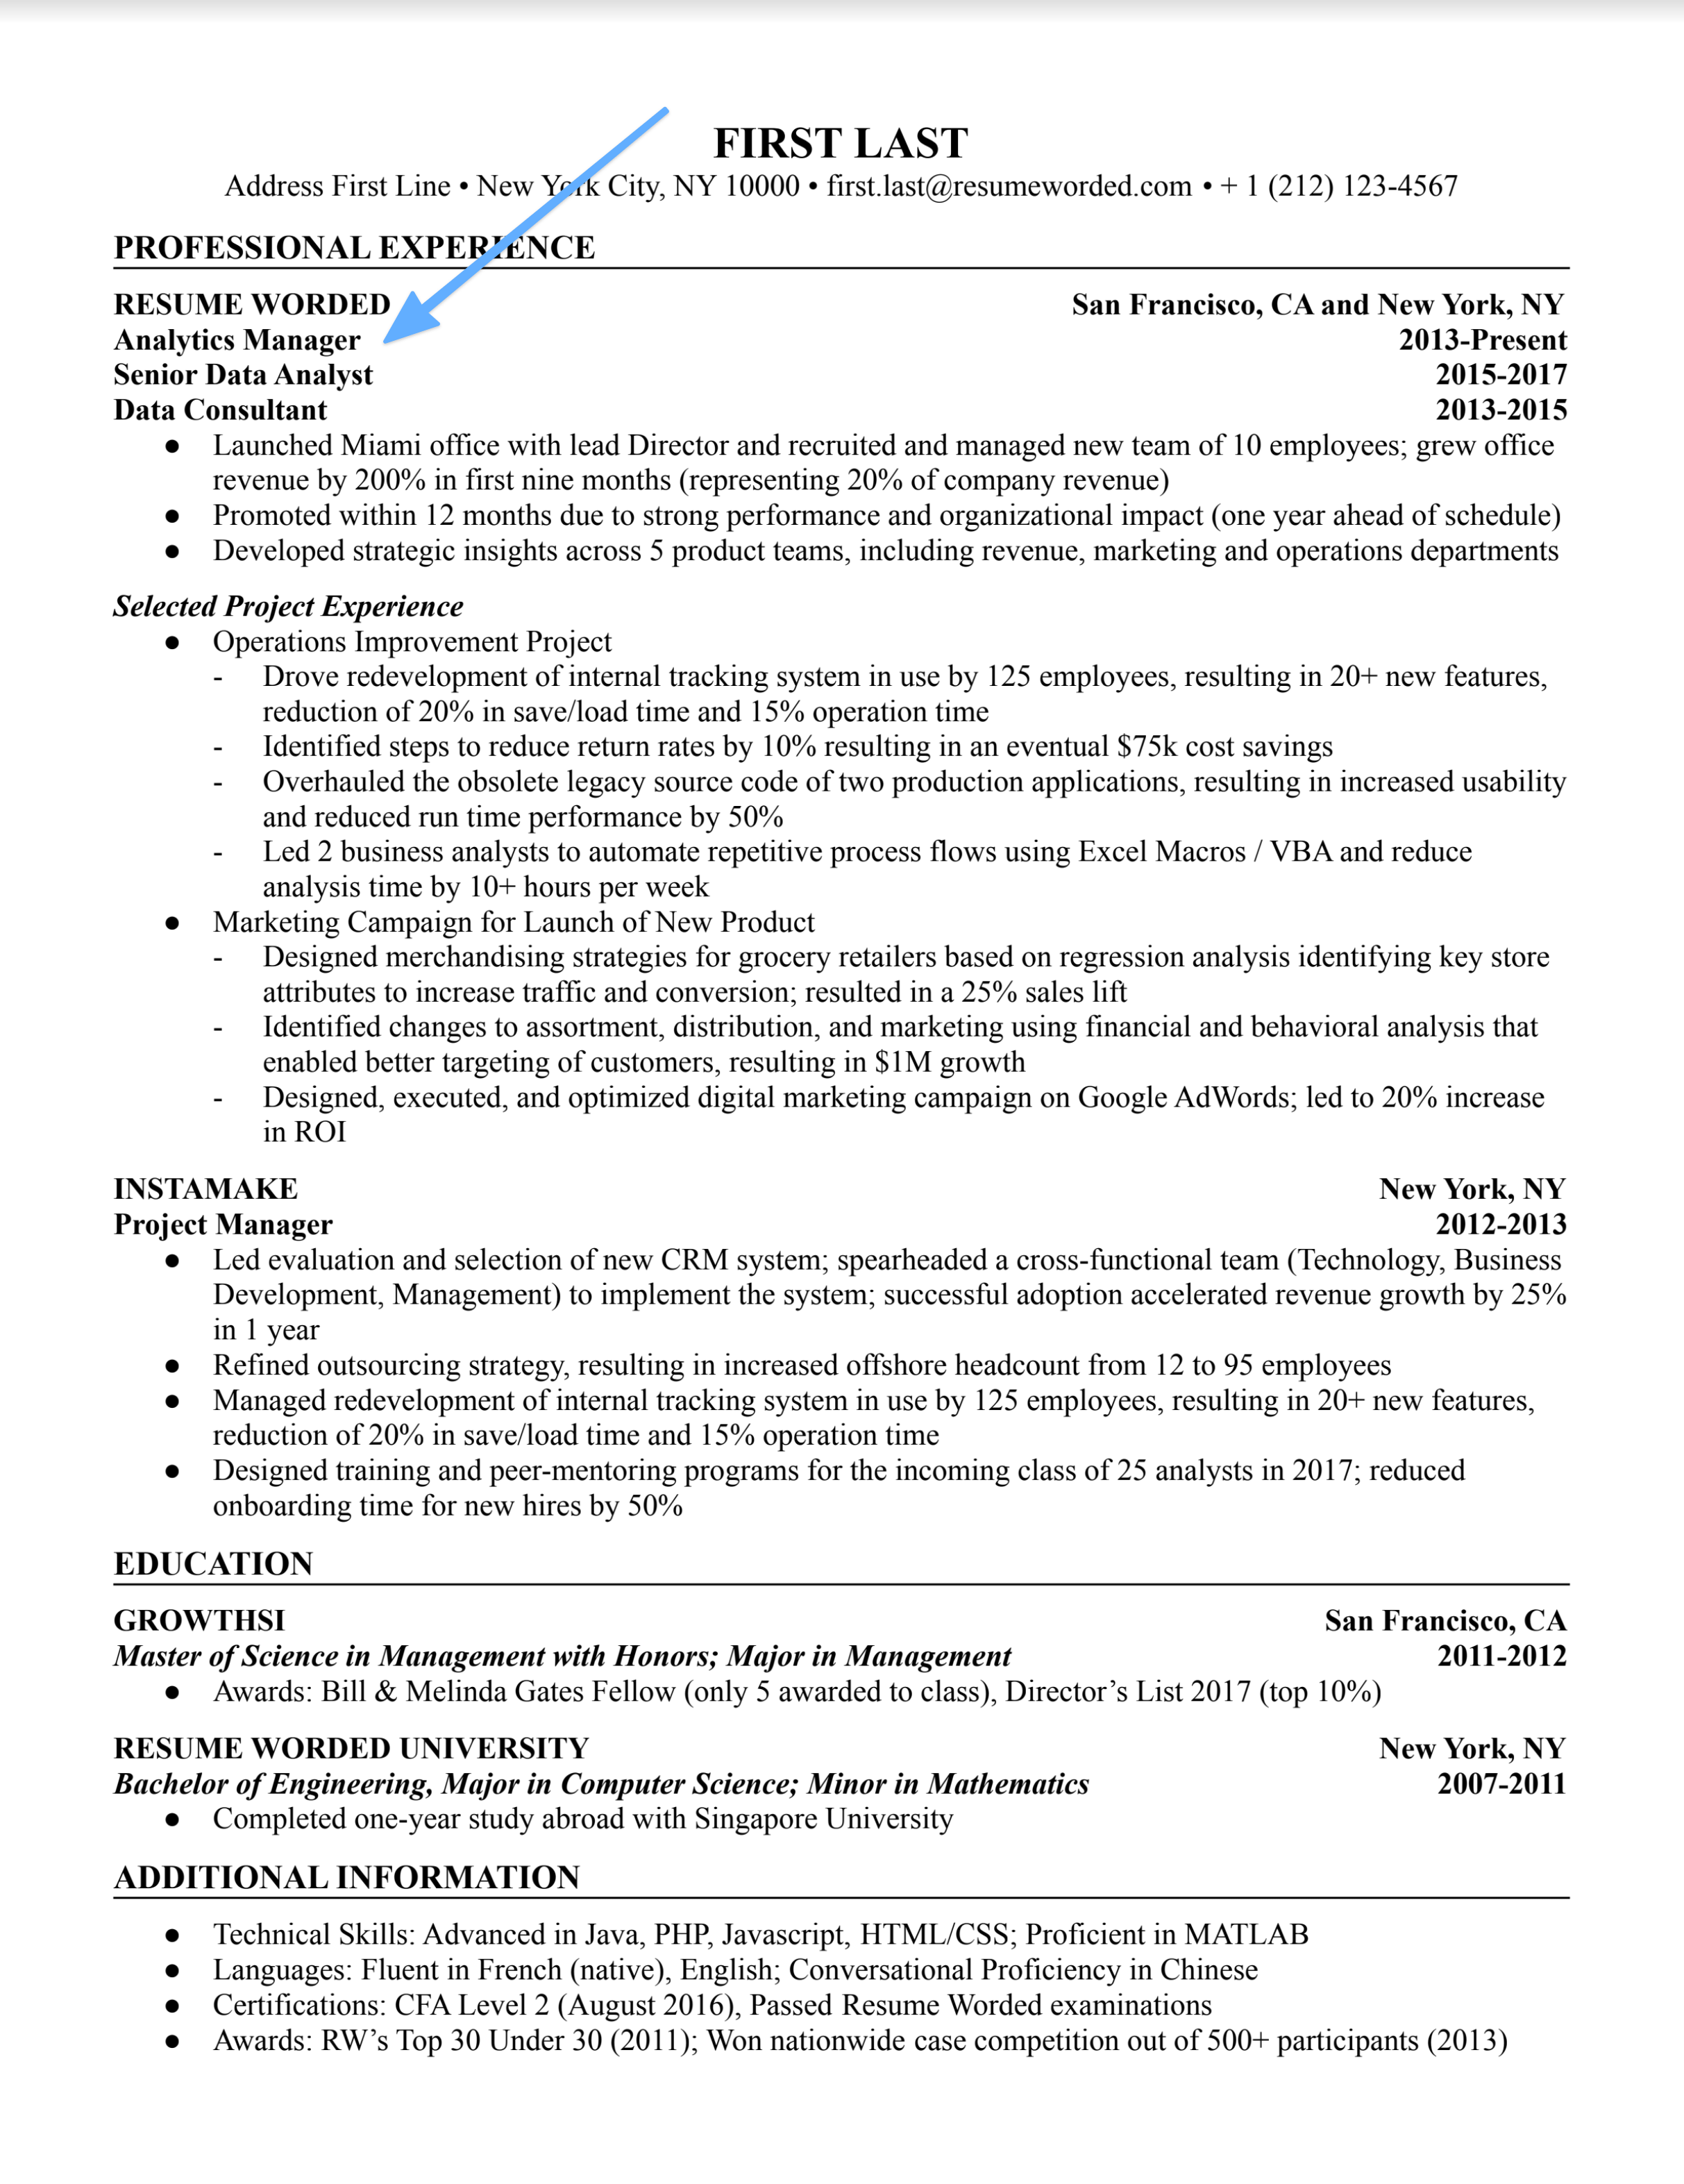 Analytics Manager Resume Template + Example